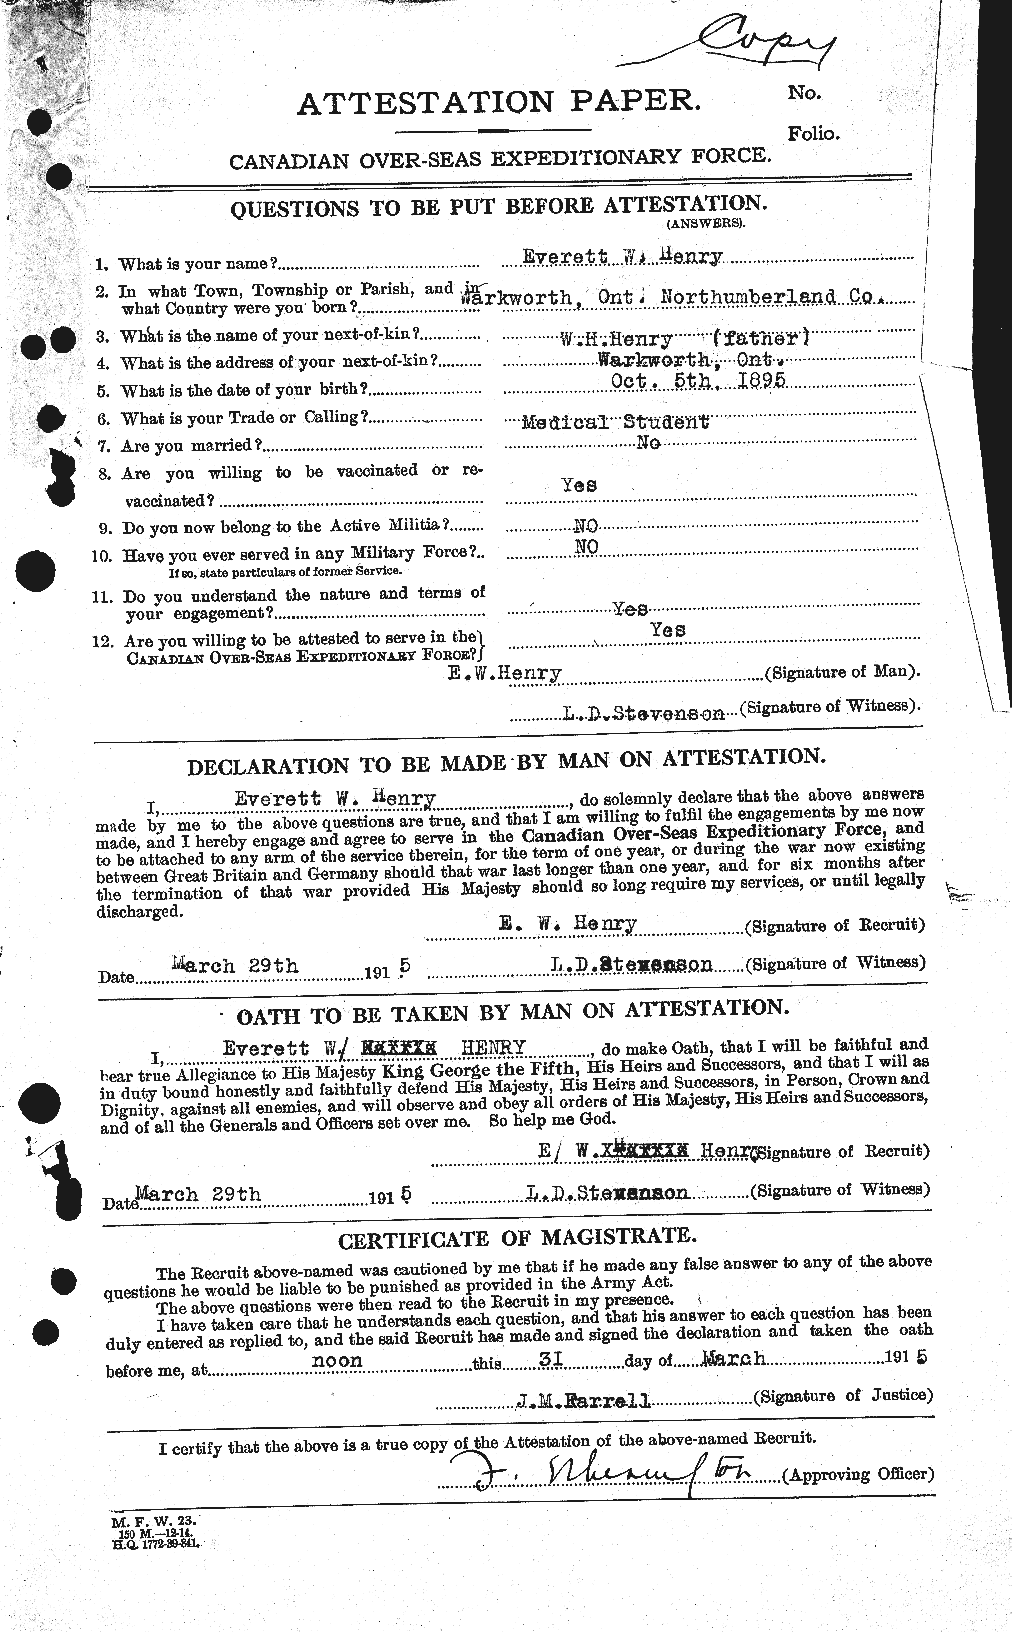 Personnel Records of the First World War - CEF 392850a